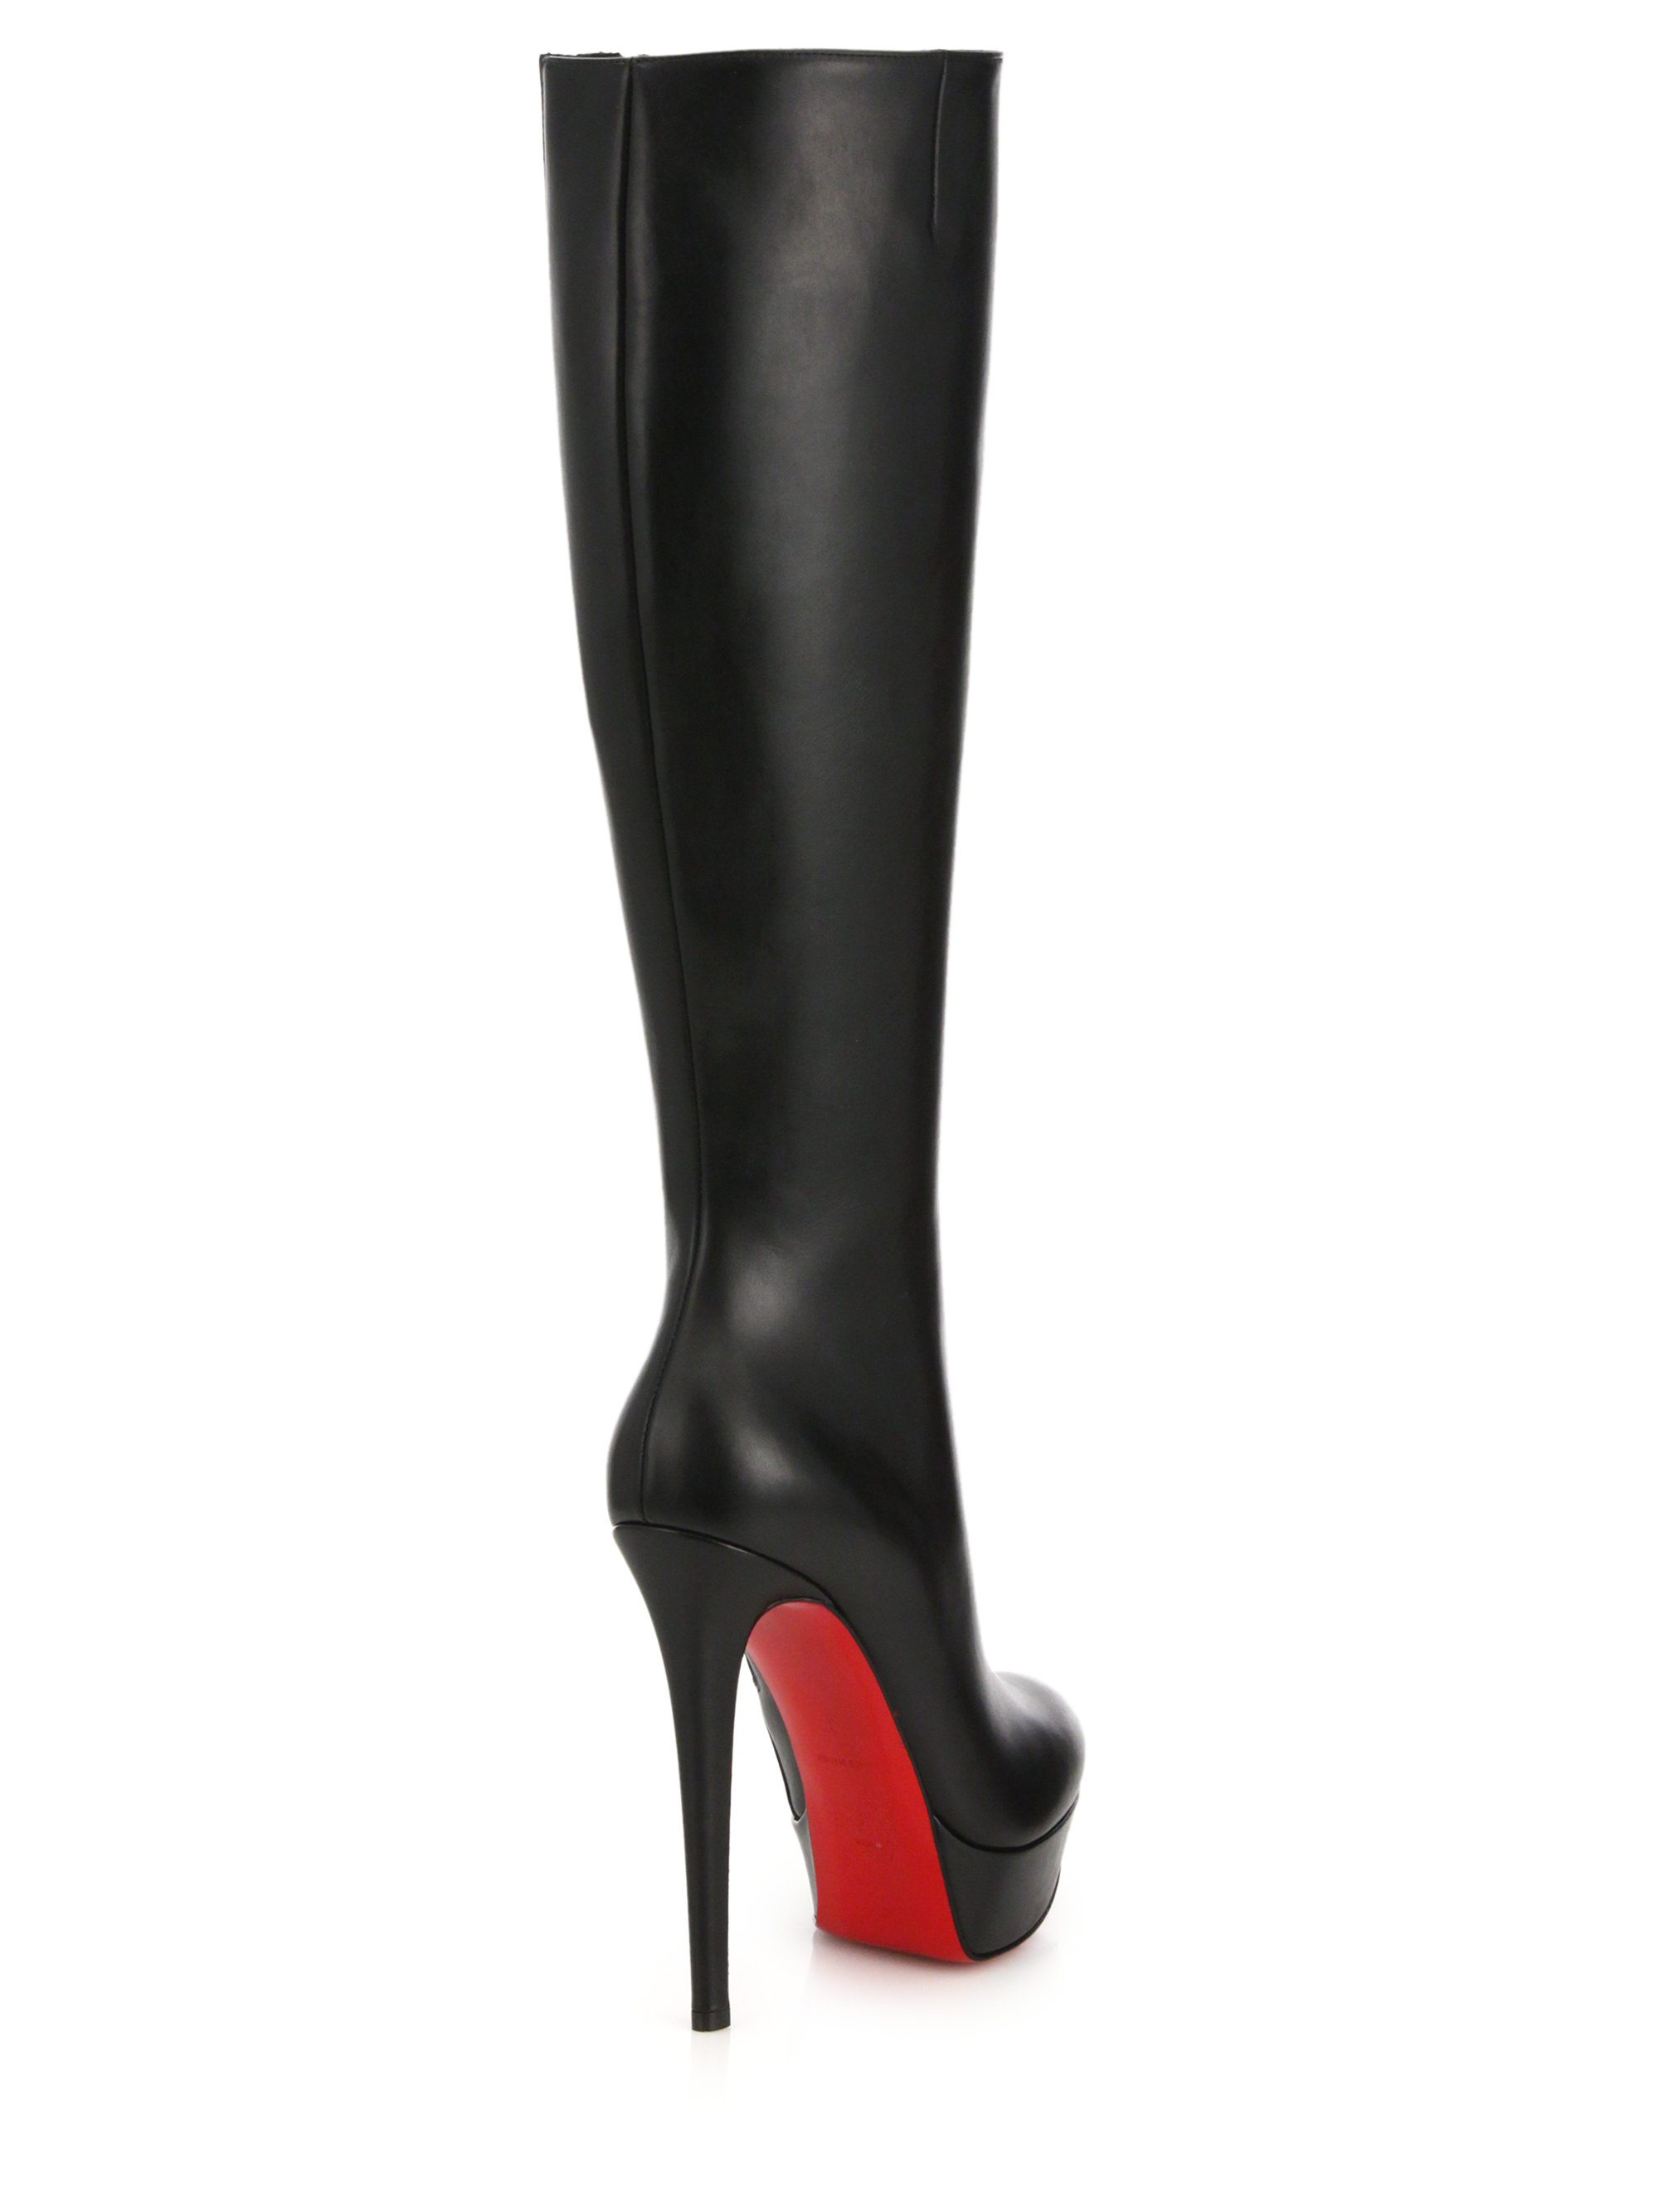 red spiked shoes - christian louboutin over the knee boots ebay | Landenberg ...